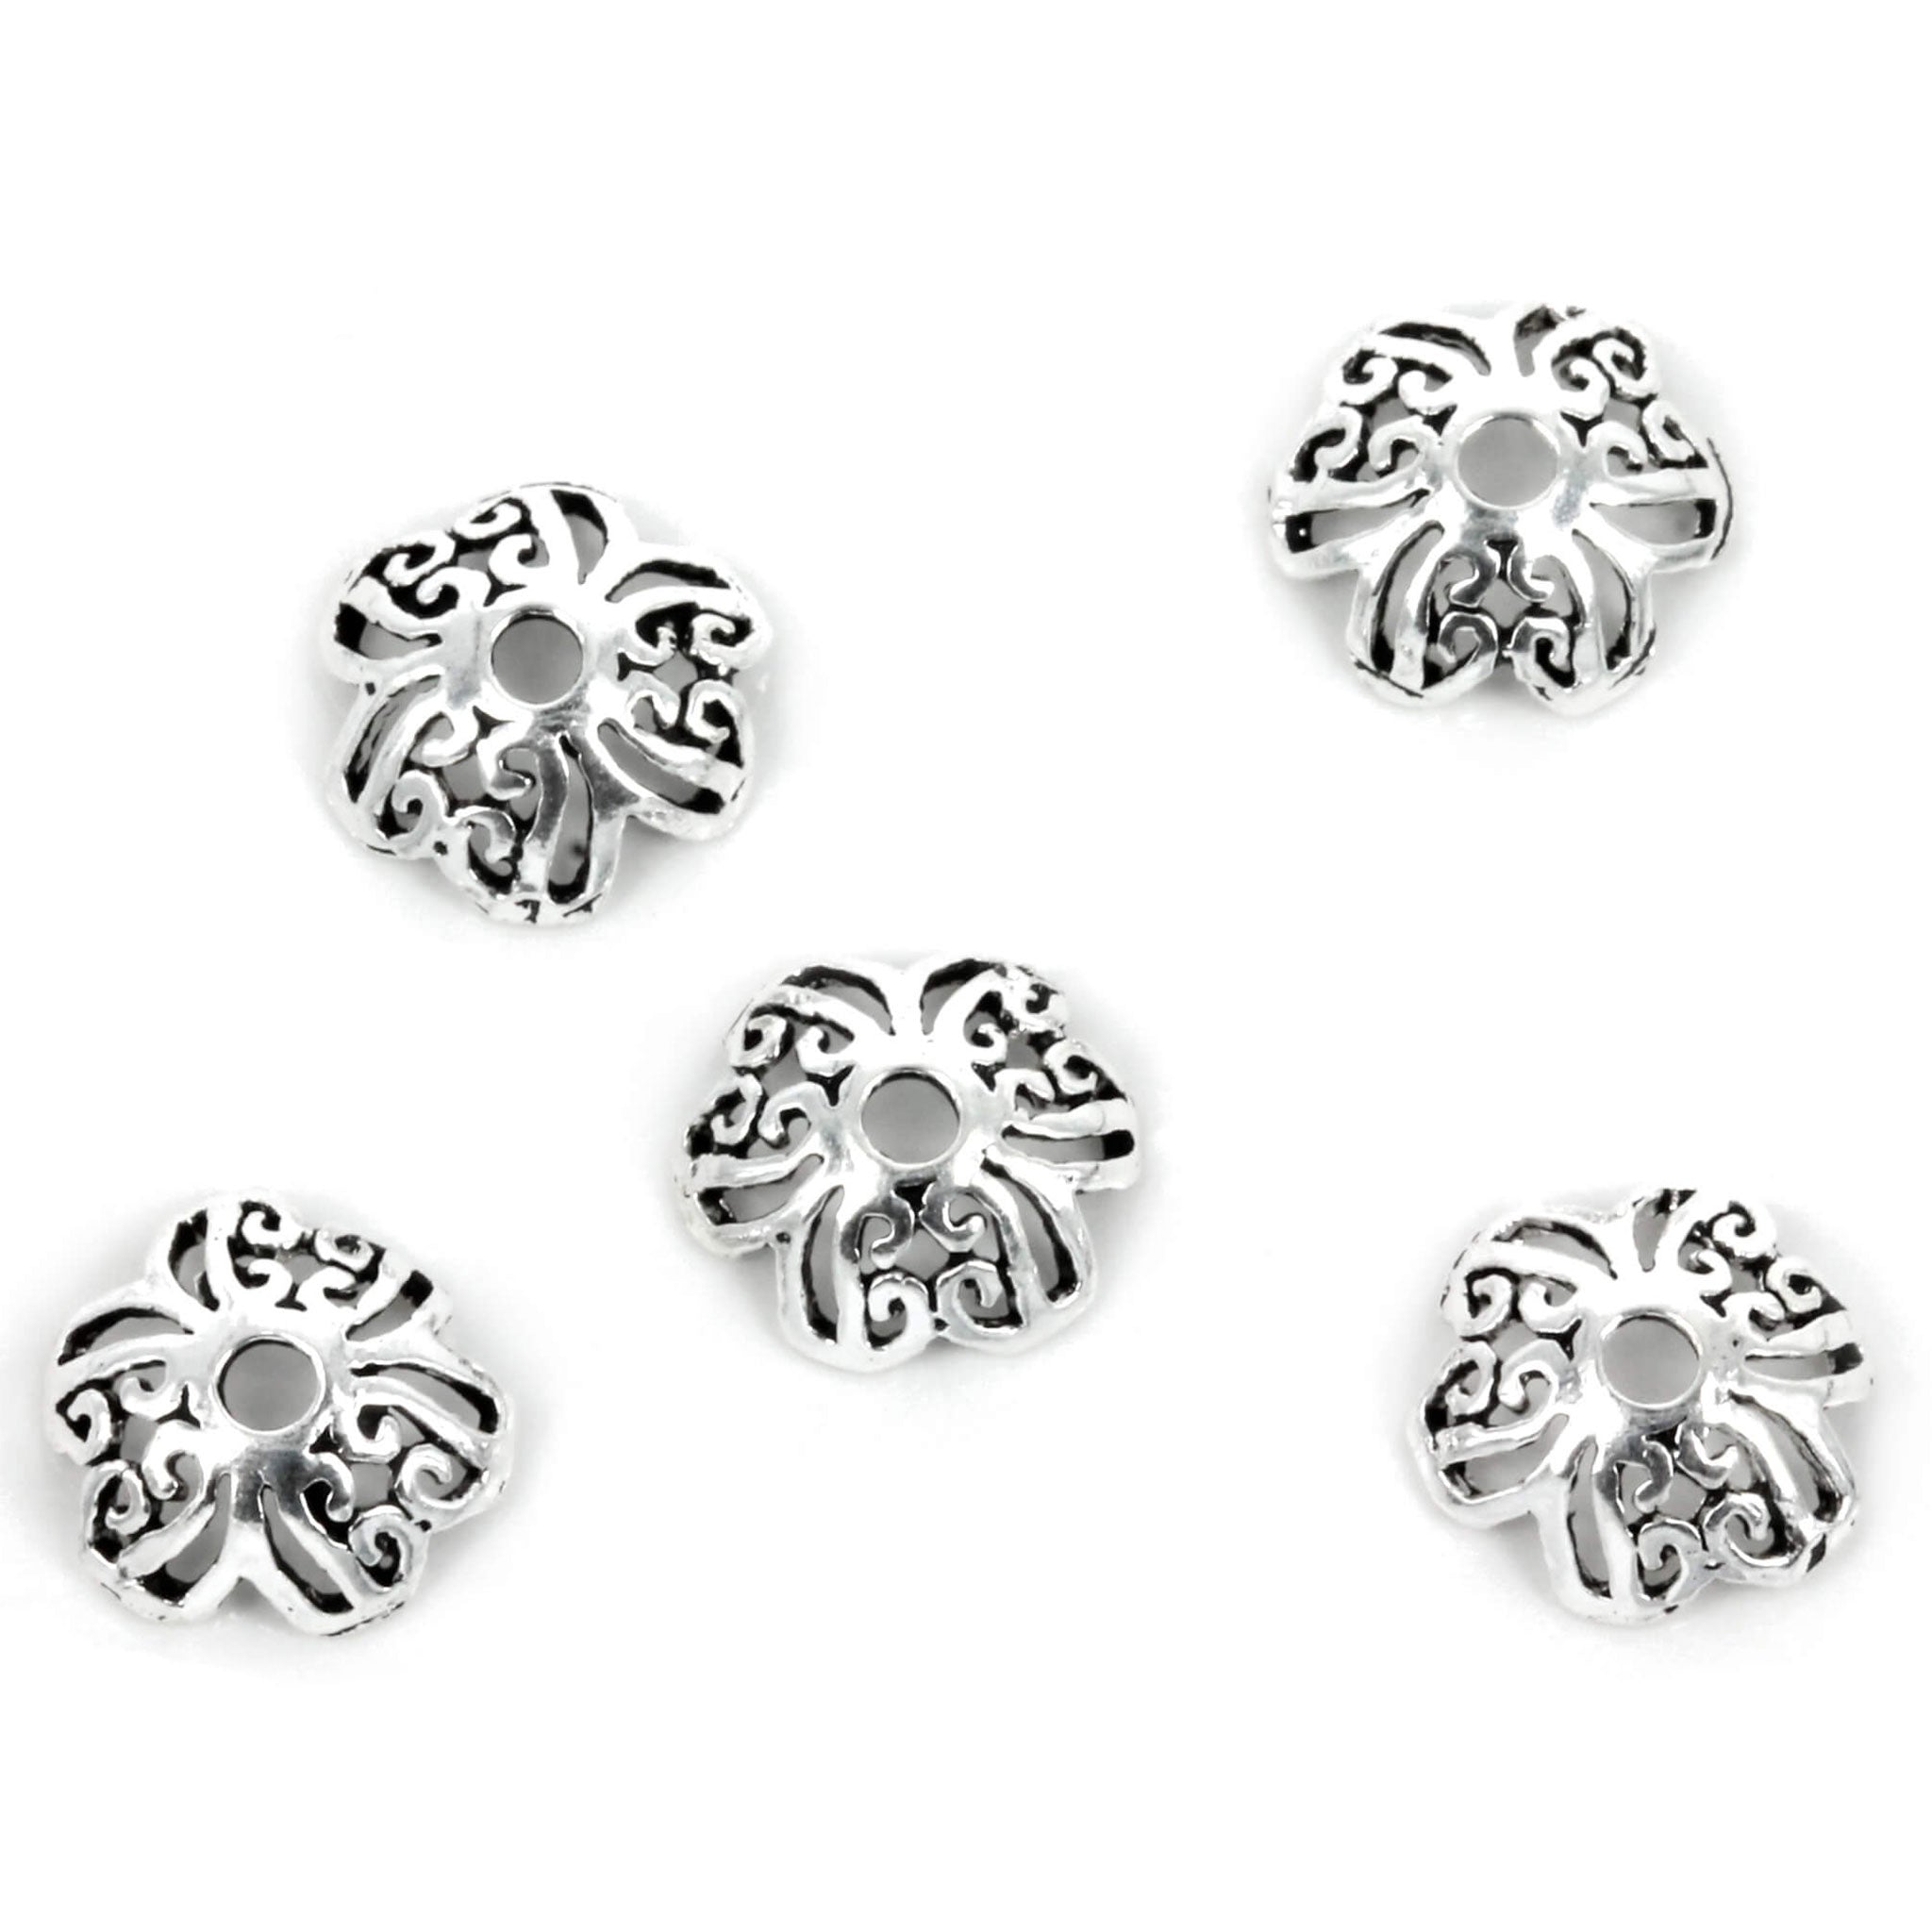 Open Curlicue Flourishes Bead Cap in Sterling Silver 9mm